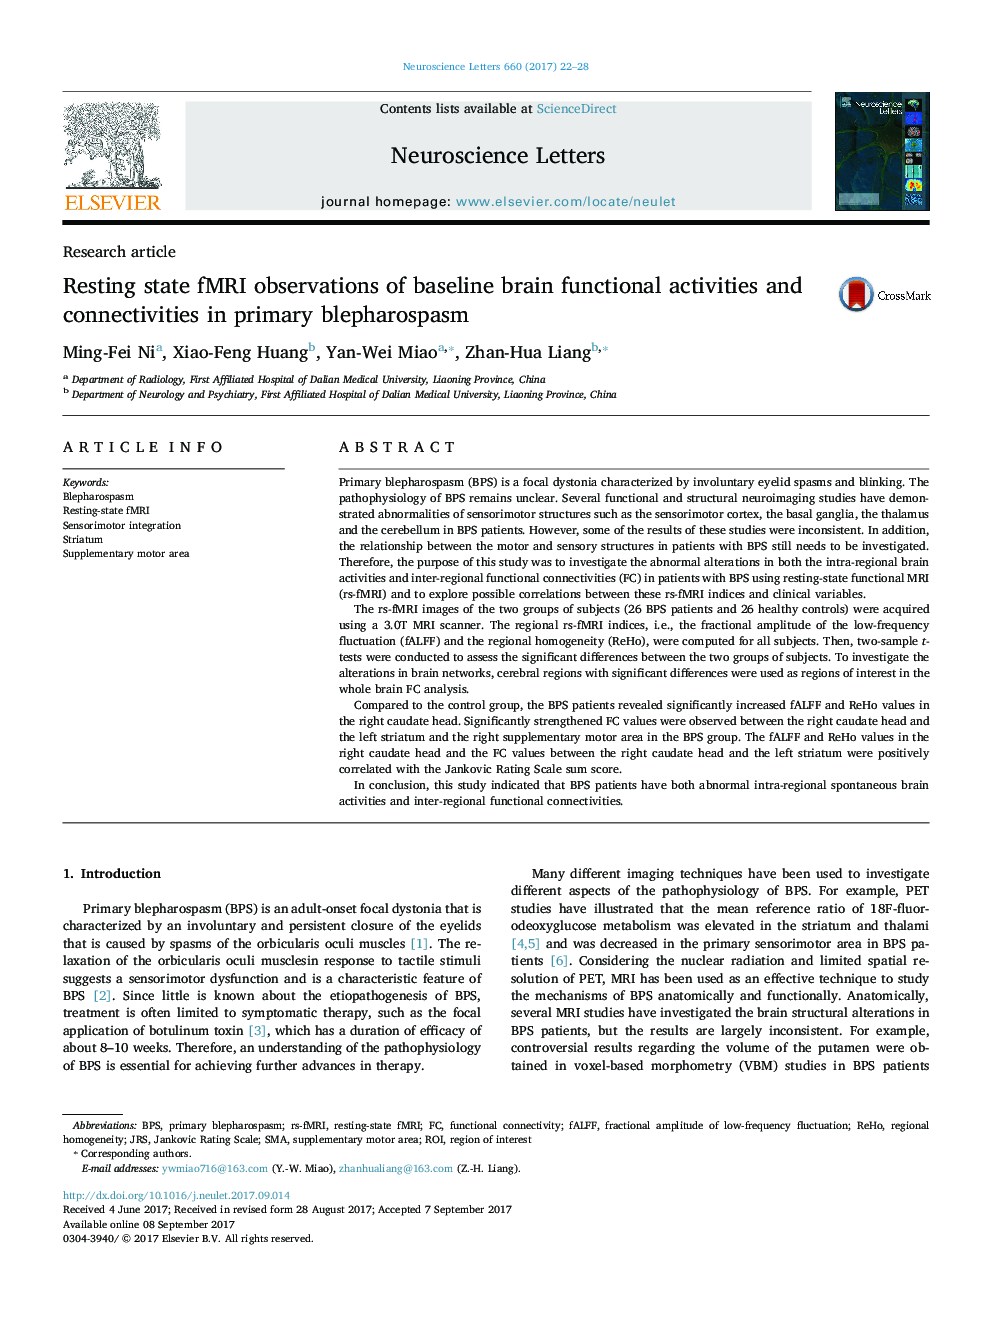 Research articleResting state fMRI observations of baseline brain functional activities and connectivities in primary blepharospasm